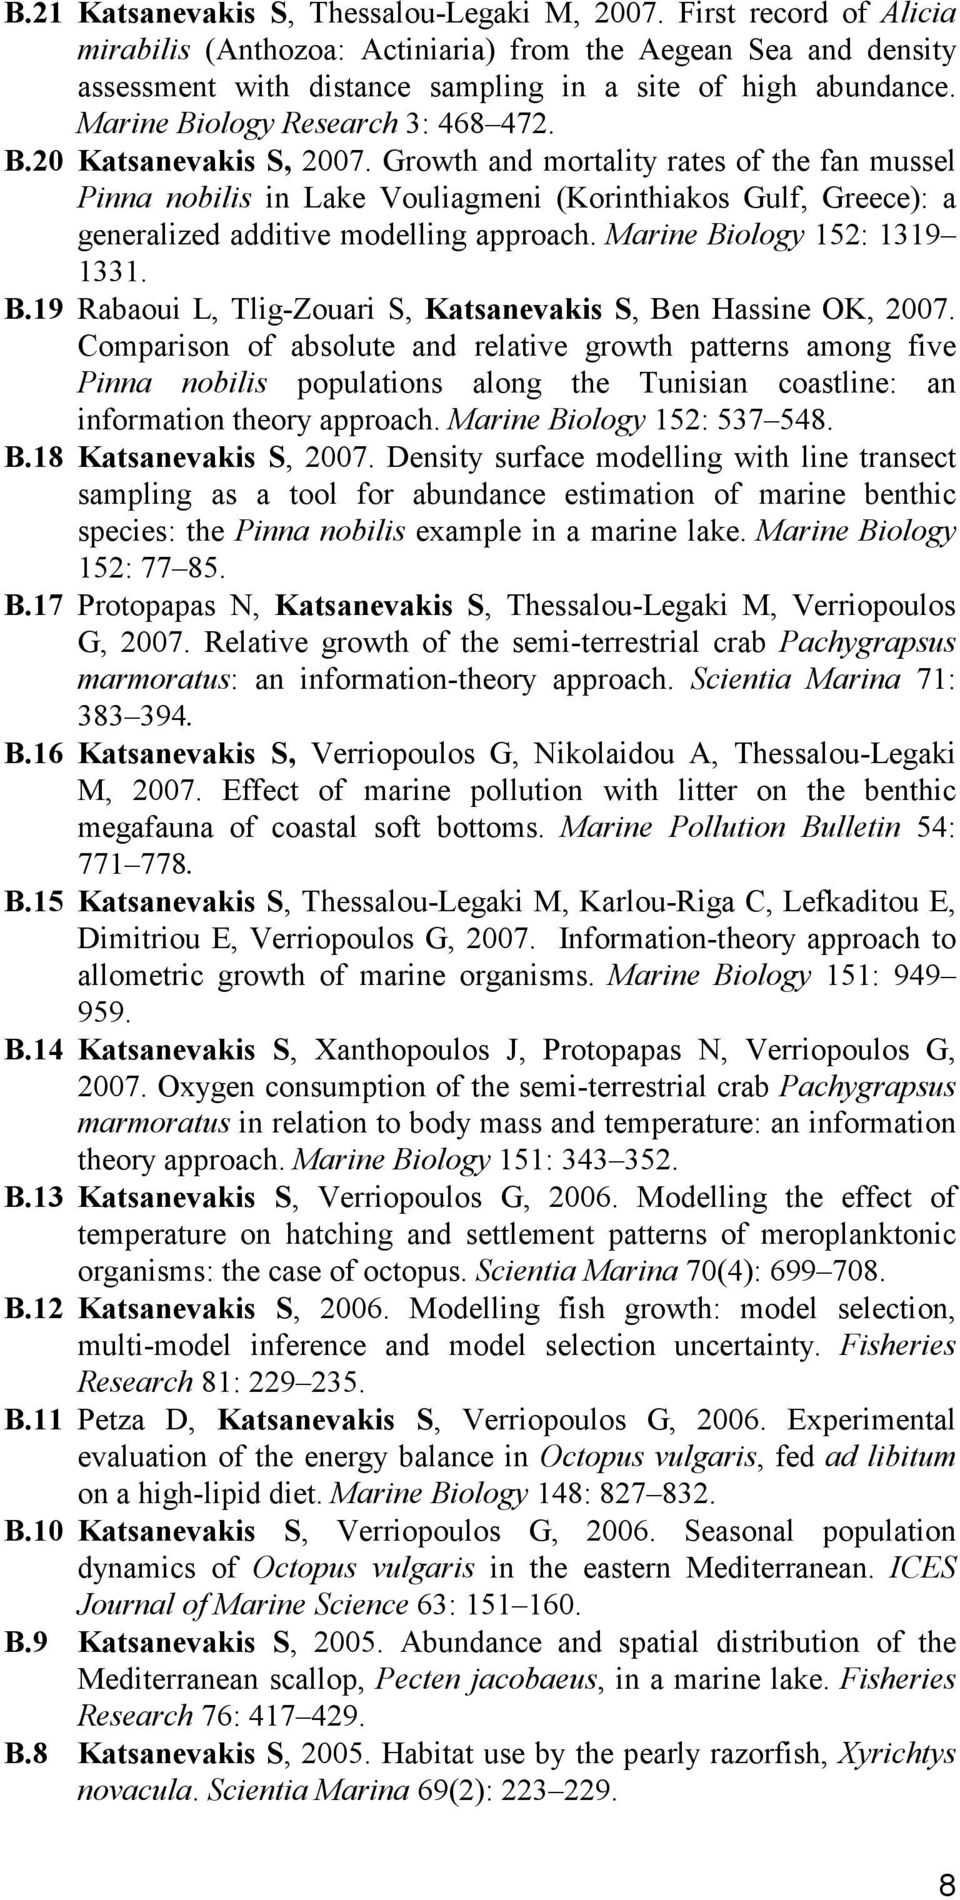 Growth and mortality rates of the fan mussel Pinna nobilis in Lake Vouliagmeni (Korinthiakos Gulf, Greece): a generalized additive modelling approach. Marine Bi